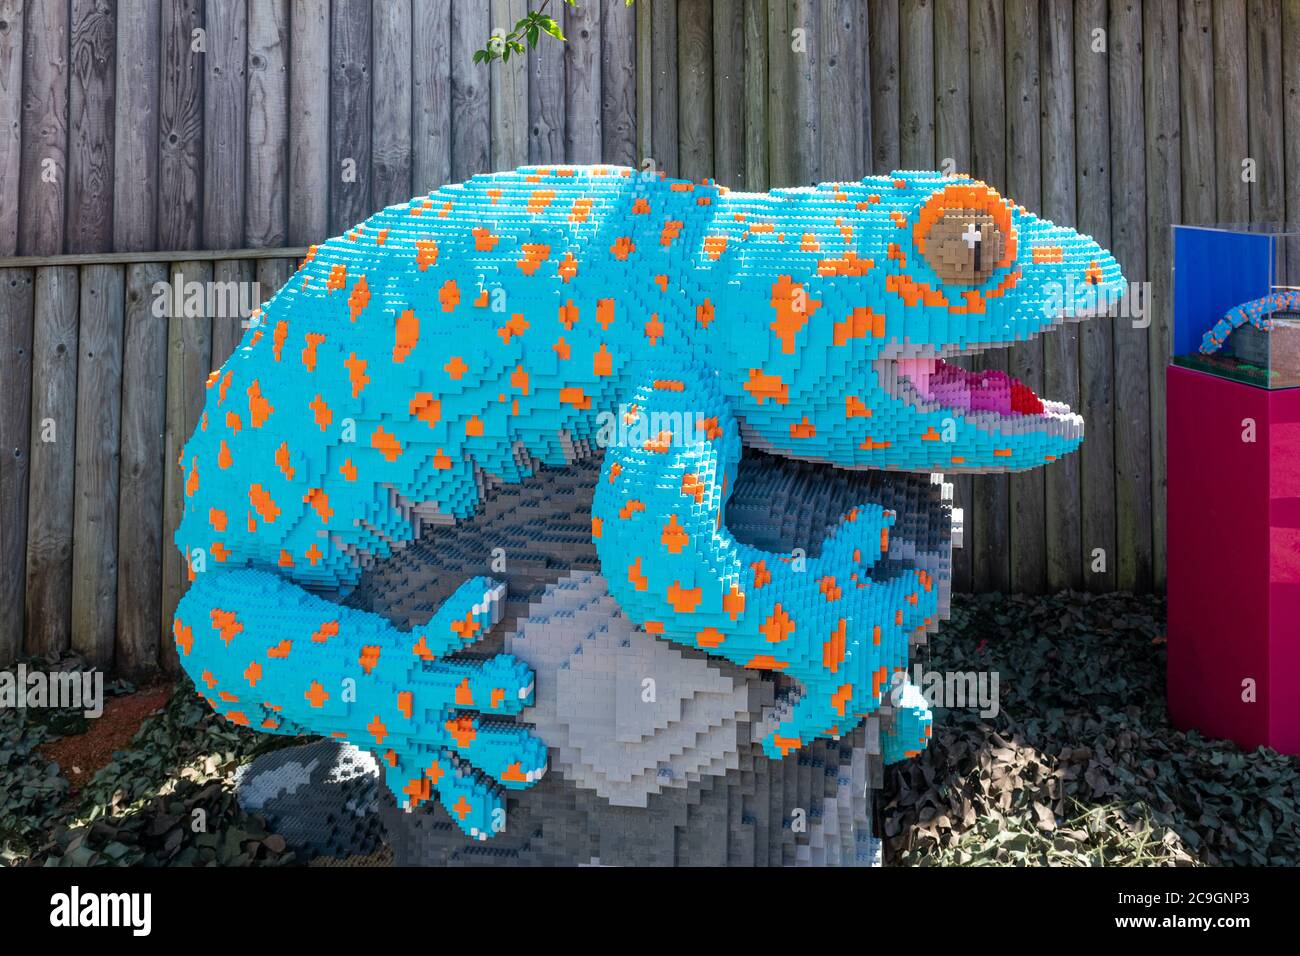 Supersized lego brick animal models at Marwell Zoo, UK, a childrens activity trail. A gecko model. Stock Photo